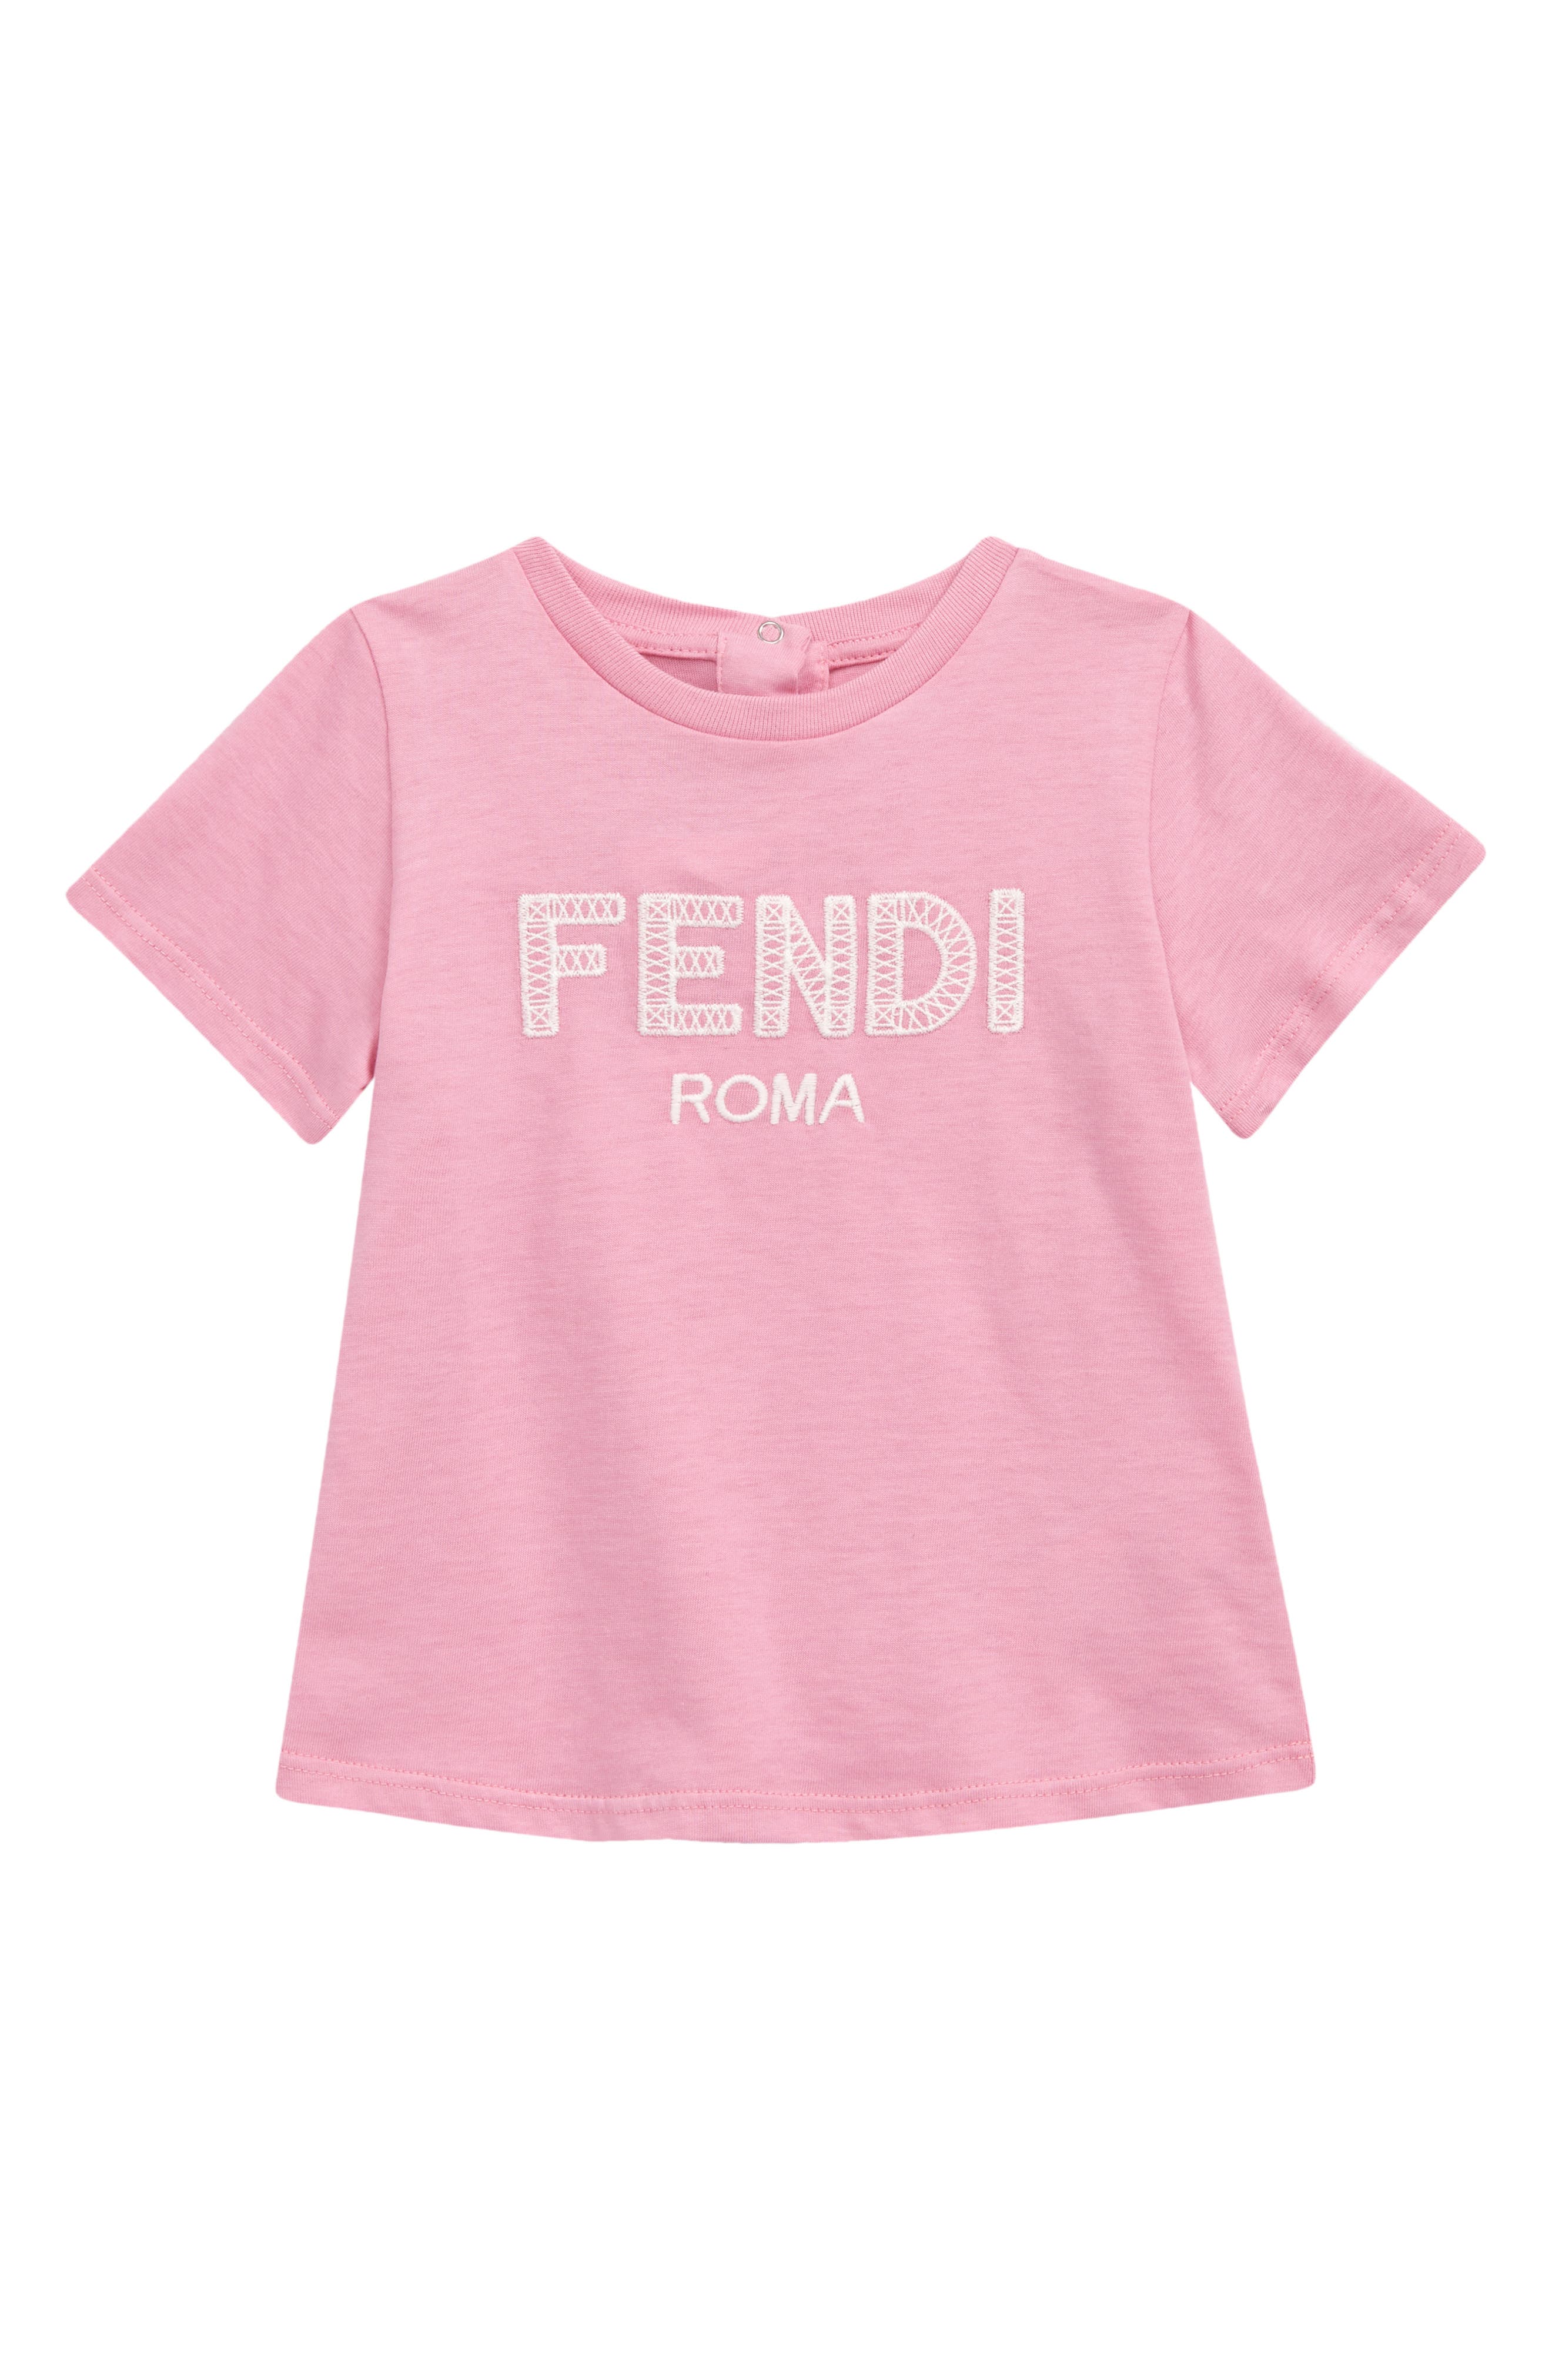 Fendi Embroidered Logo Cotton Tee in Pink at Nordstrom, Size 24M Us